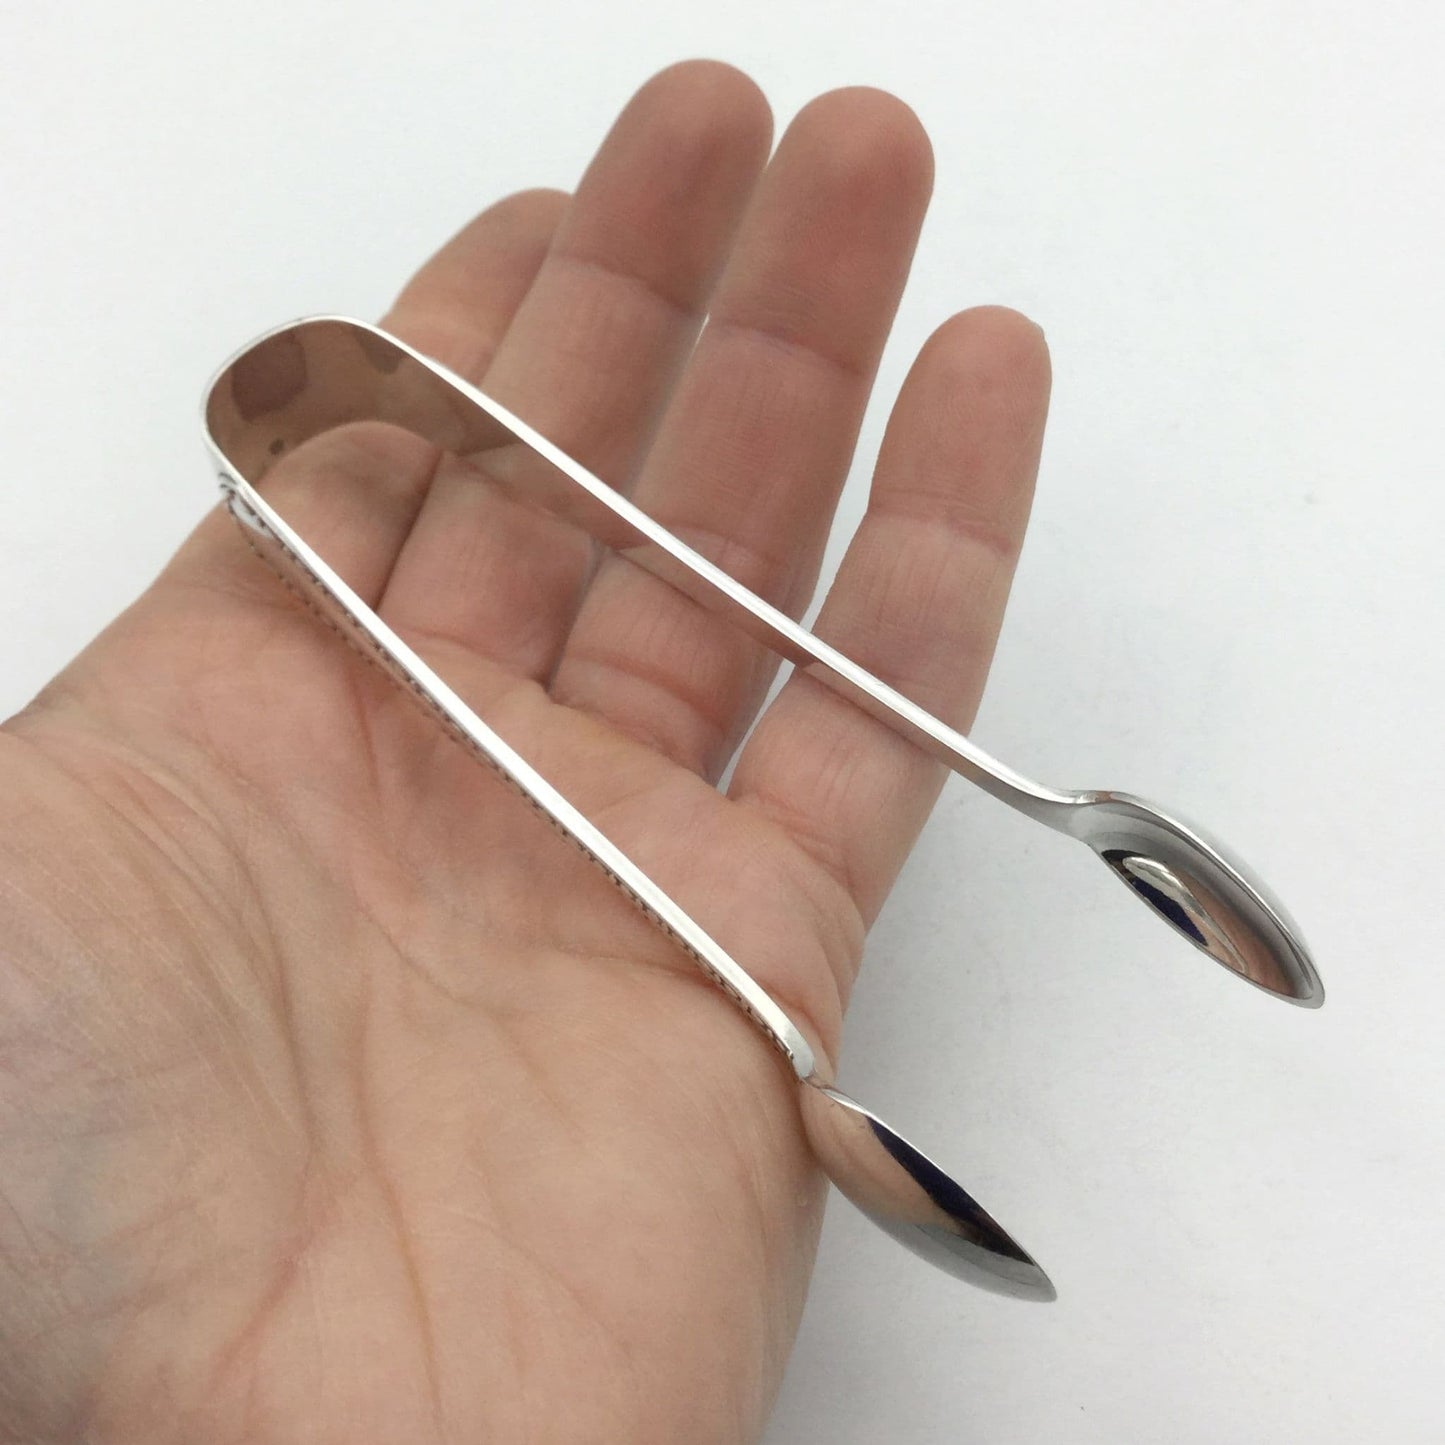 Silver plated sugar tongs in the palm of a hand